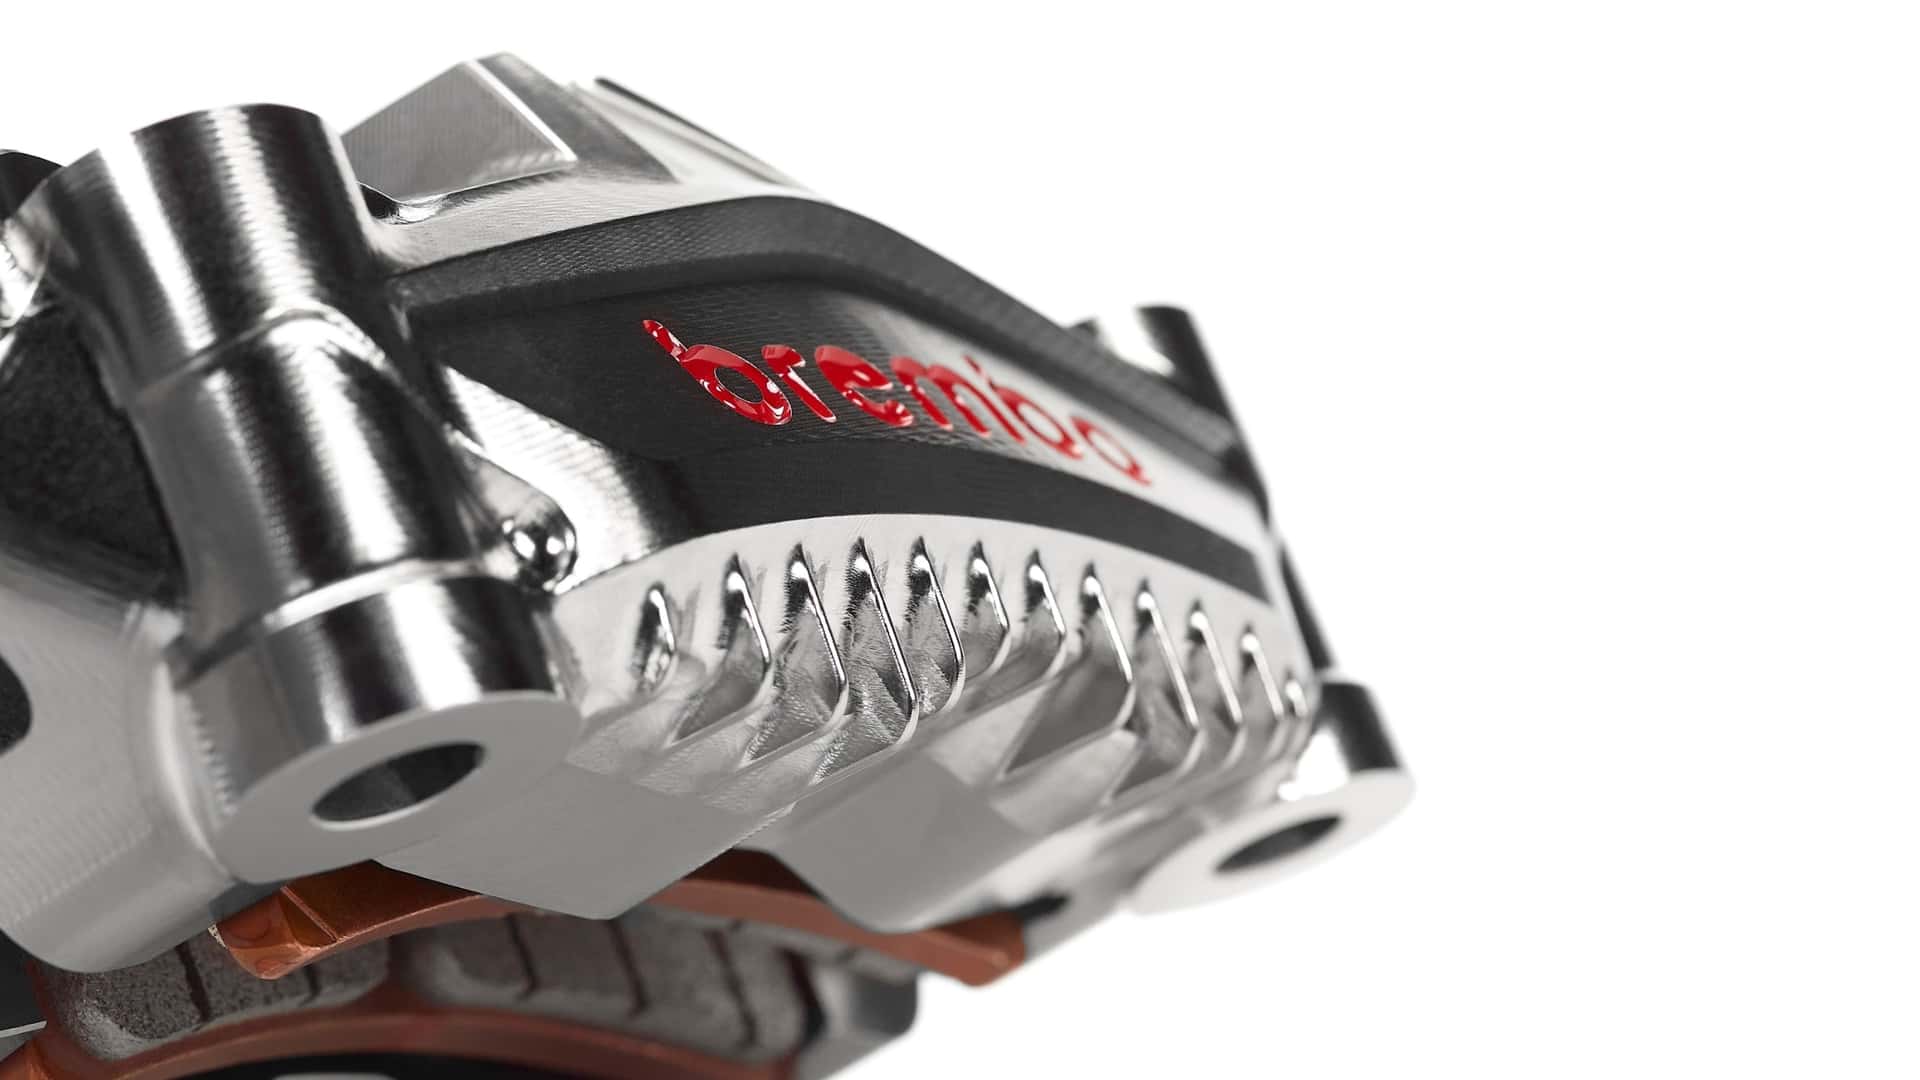 new brembo gp4-motogp calipers are designed for top-tier superbikes